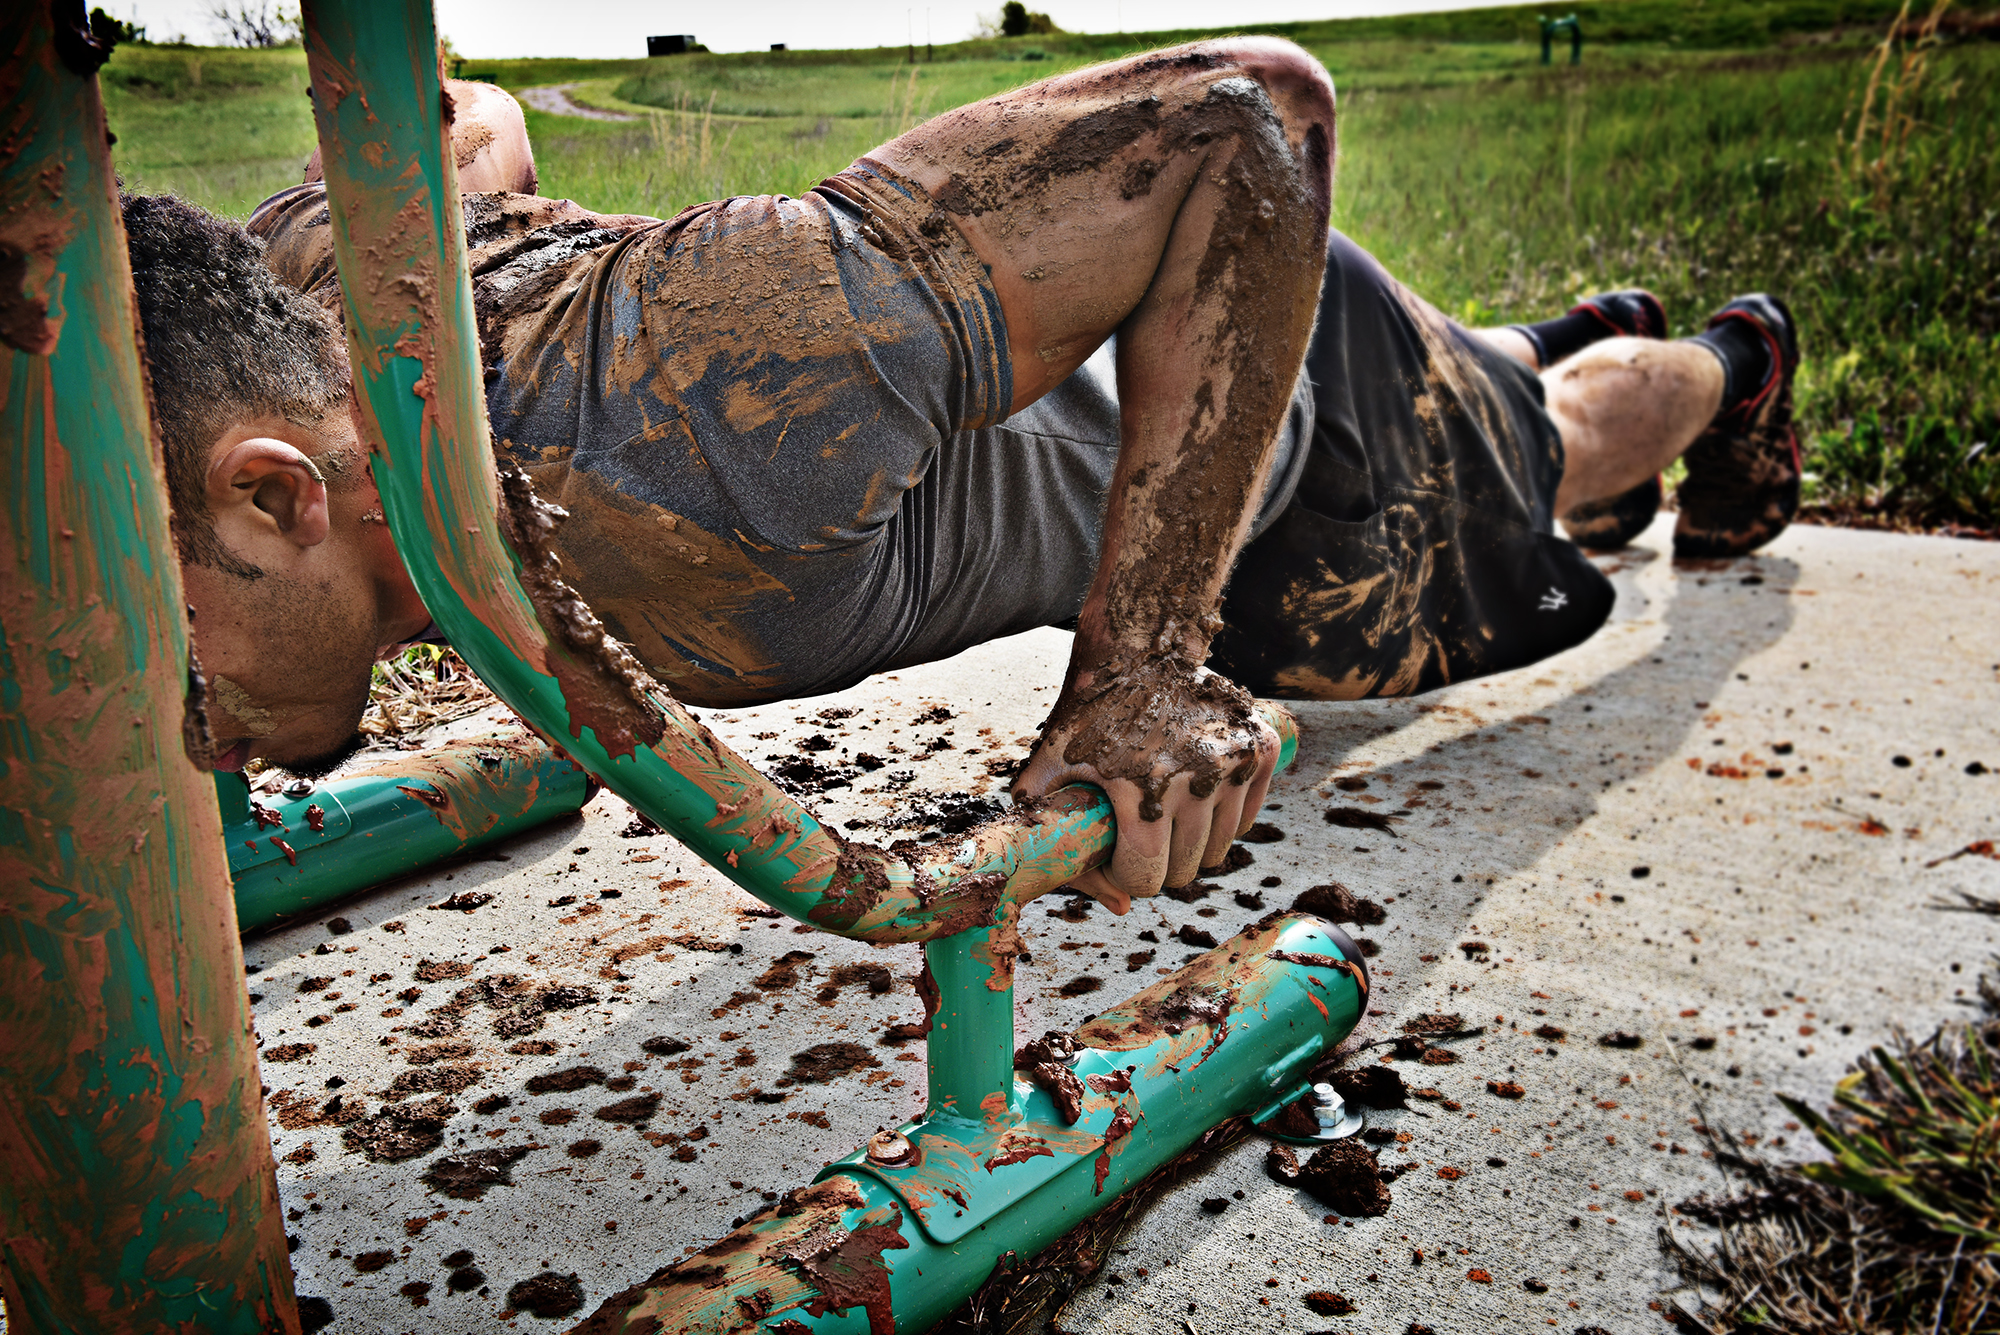 30 Minute Mud run workout with Comfort Workout Clothes